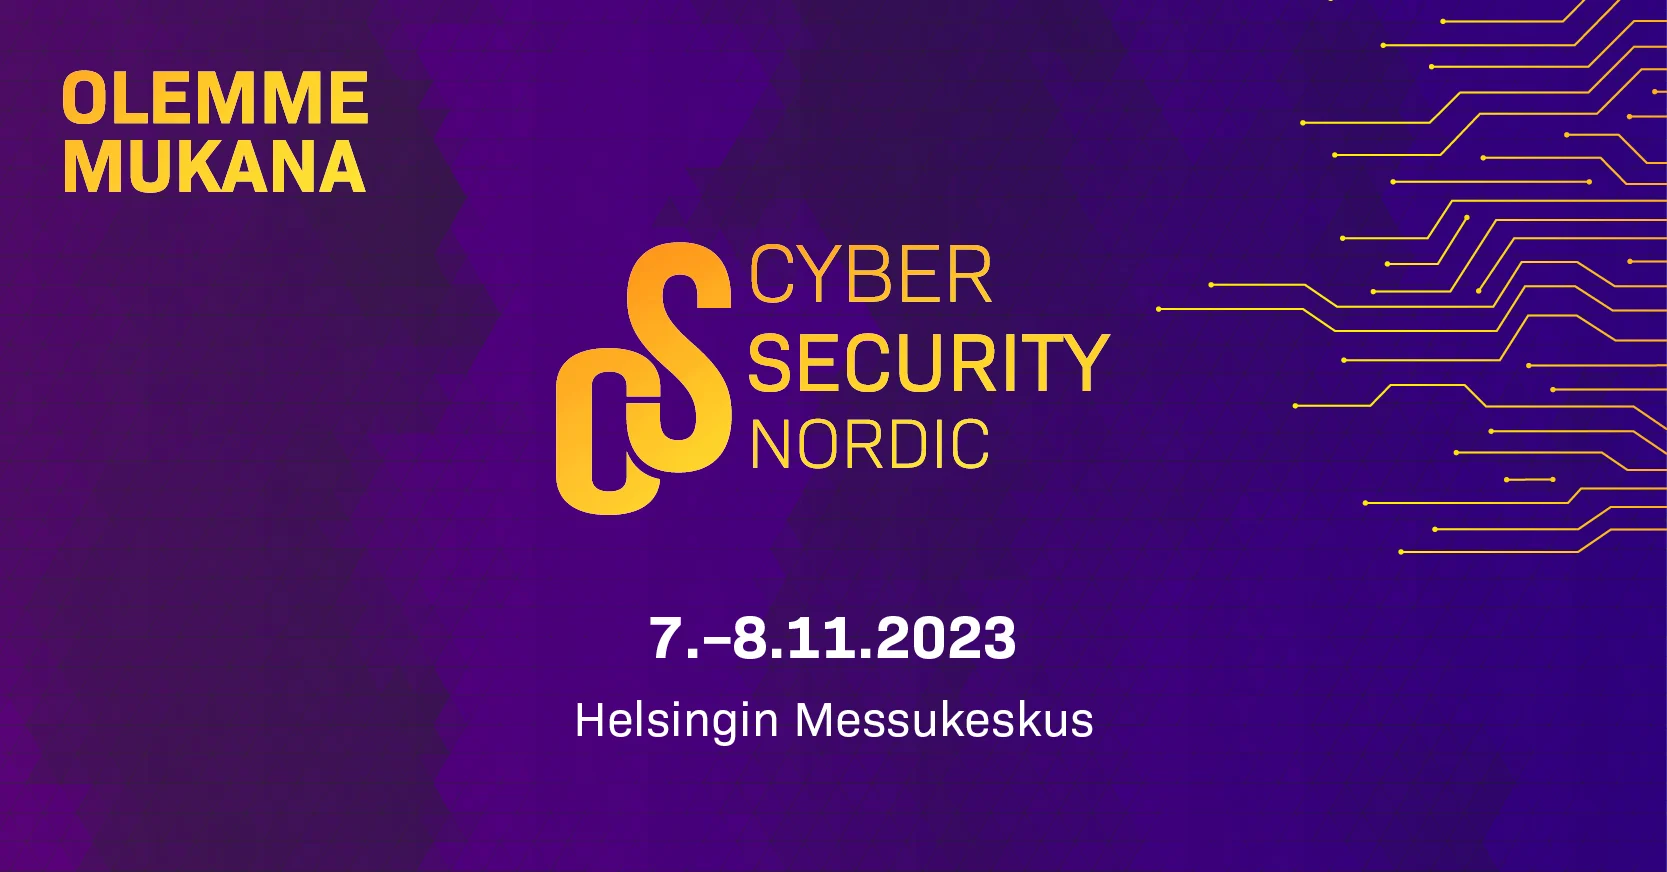 Cyber Security Nordic event 2023 banner